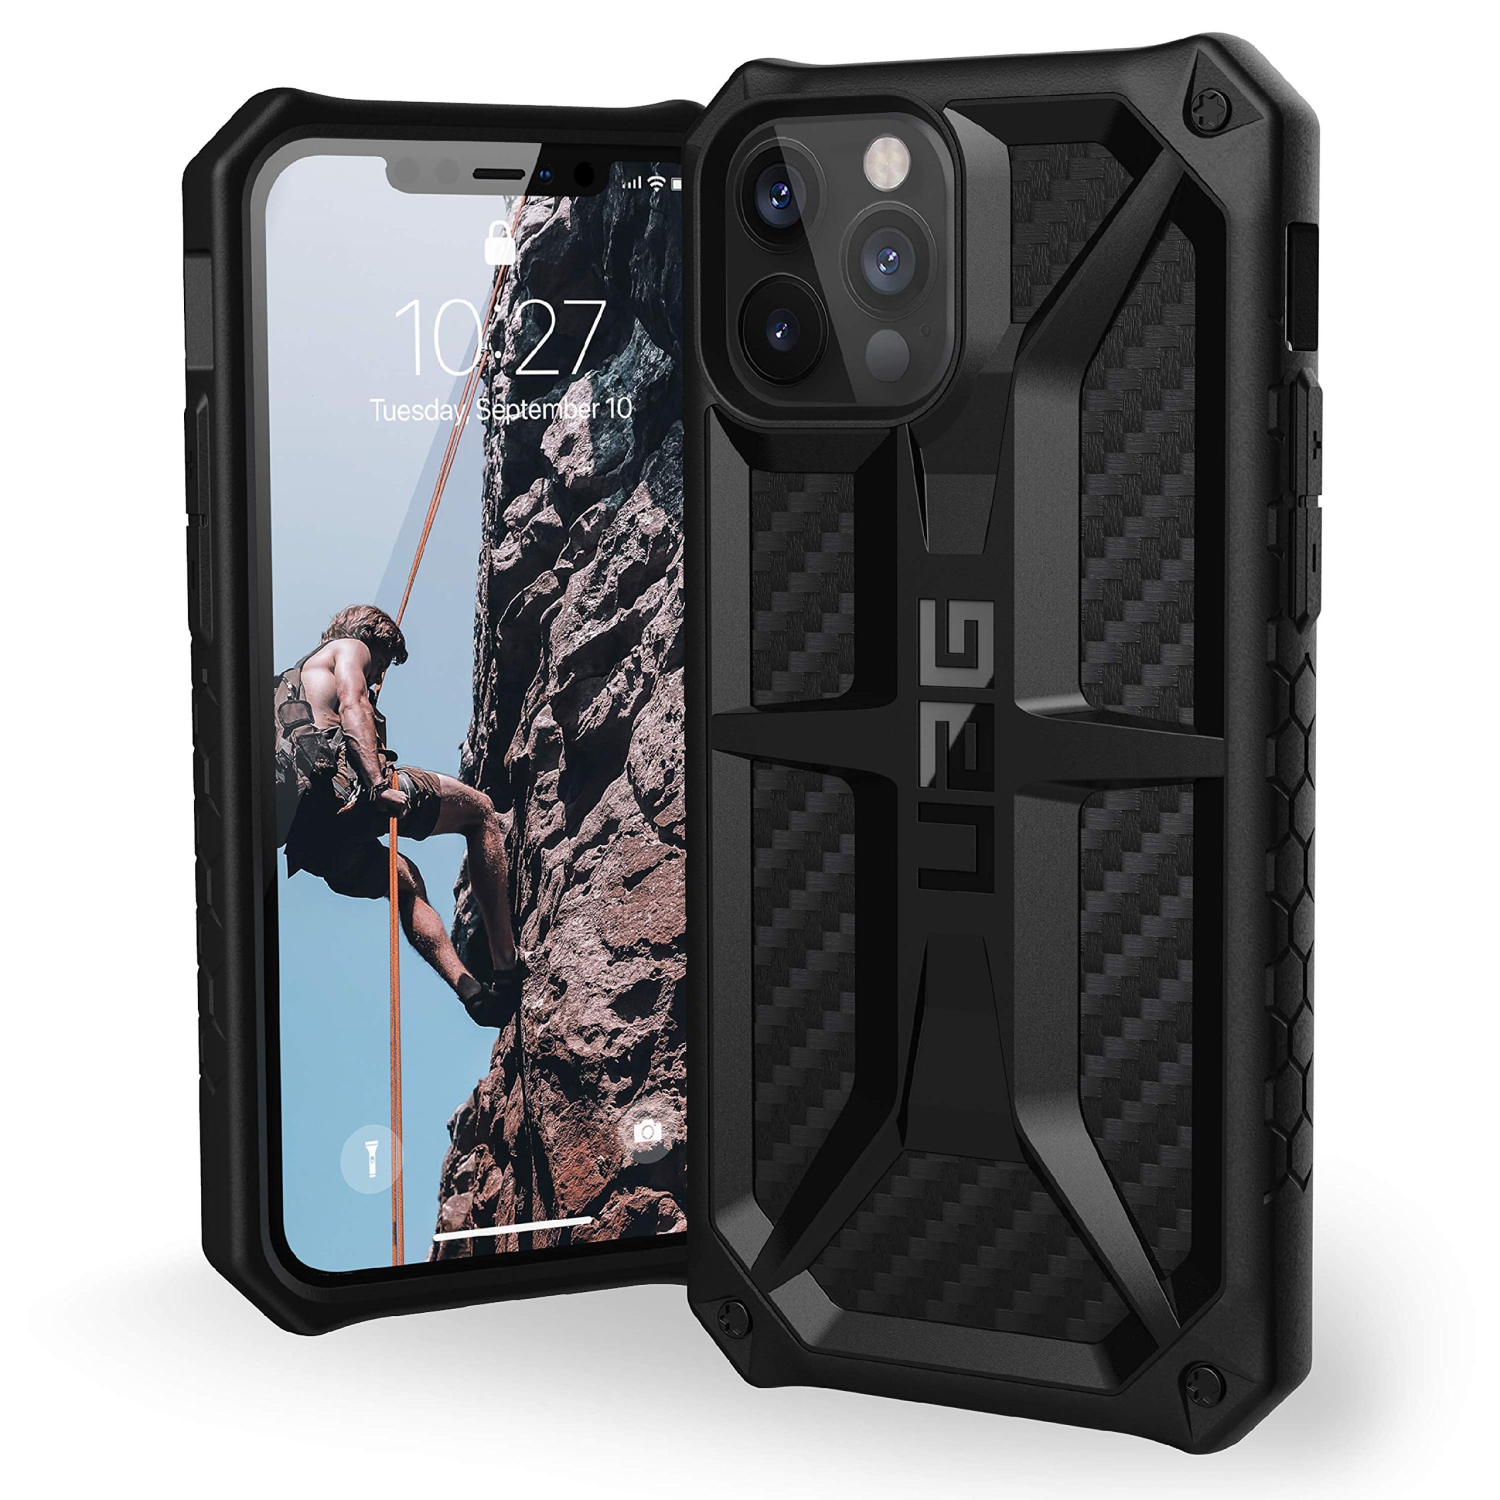 URBAN ARMOR GEAR UAG Designed for iPhone 12 Case/iPhone 12 Pro Case 6.1-inch Screen Rugged Lightweight Slim Shockproof Pre